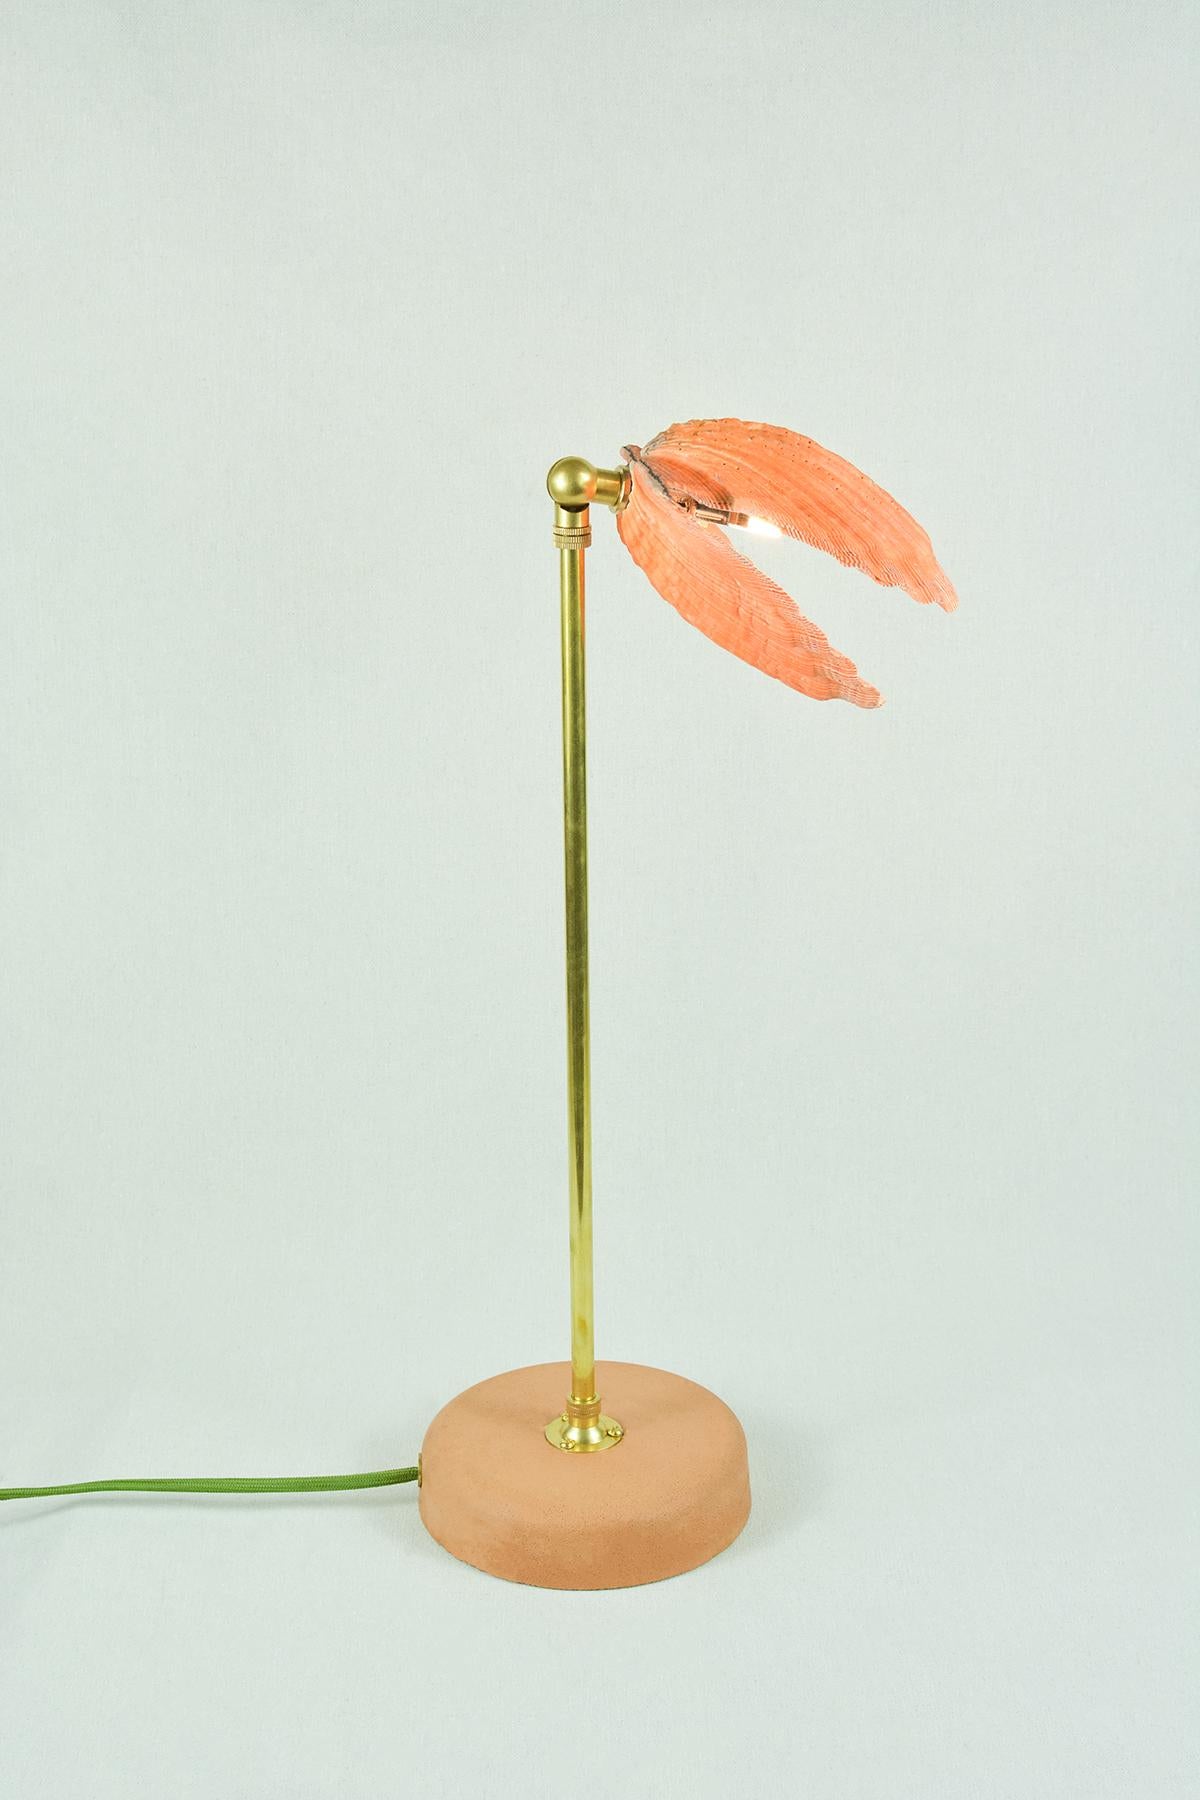 'Lion's Paw' Table Lamp in Brass and Terra Cotta with Real Scallop Shell Shade For Sale 1